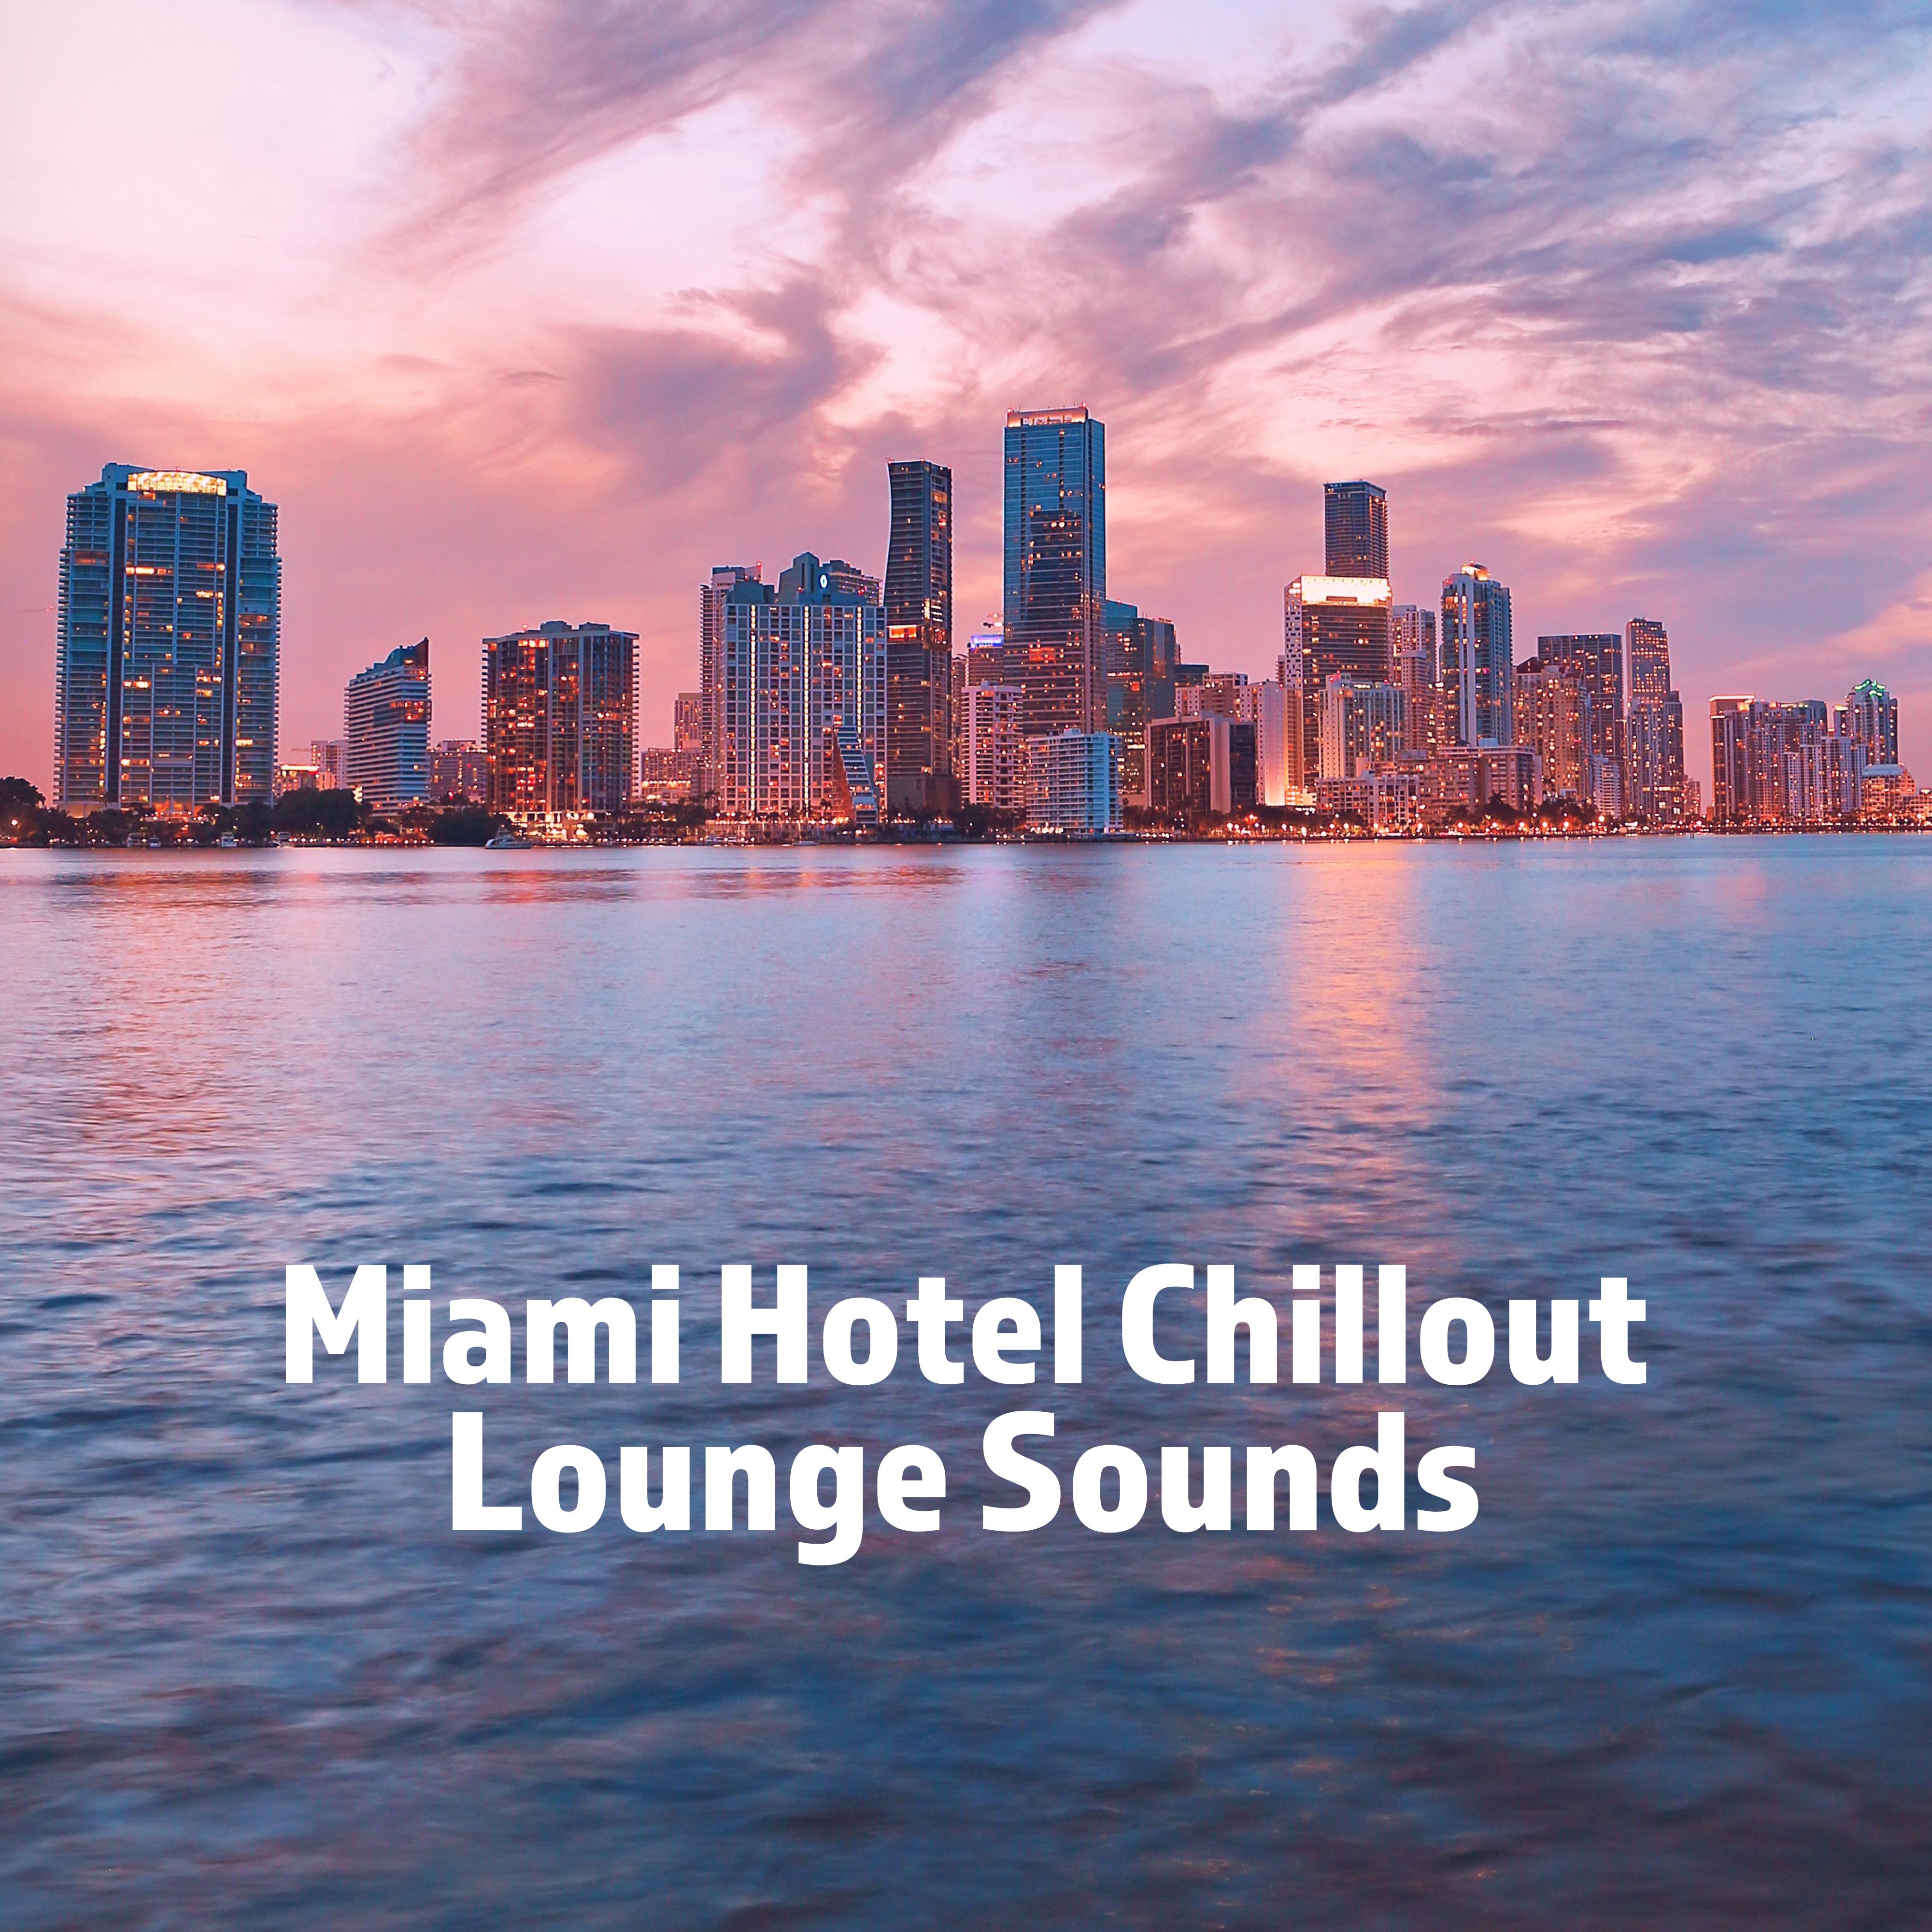 Miami Hotel Chillout Lounge Sounds: 2019 Relaxing Chill Out Music, Vacation Holiday Calm & Rest